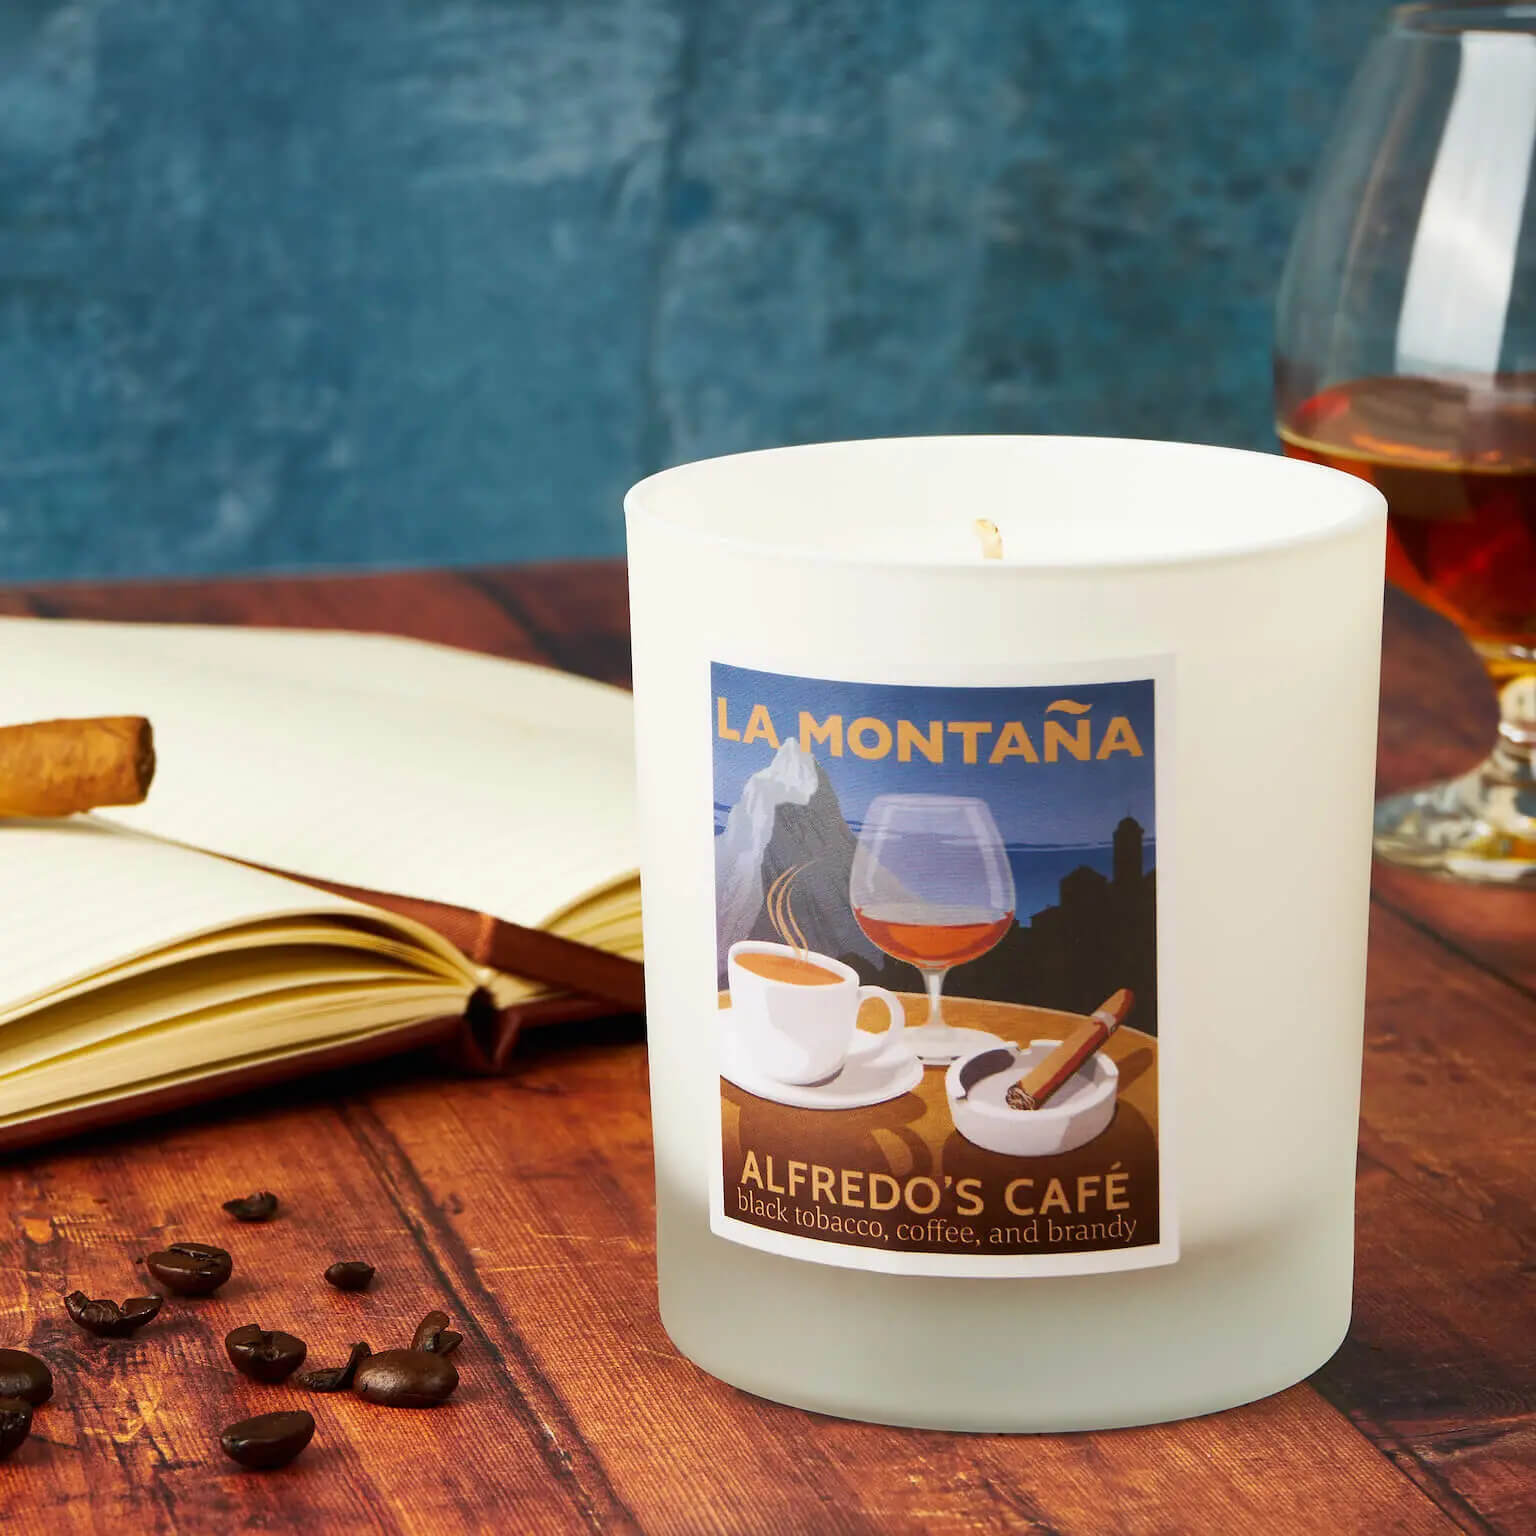 Alfredo's Cafe Candle Scented Candle